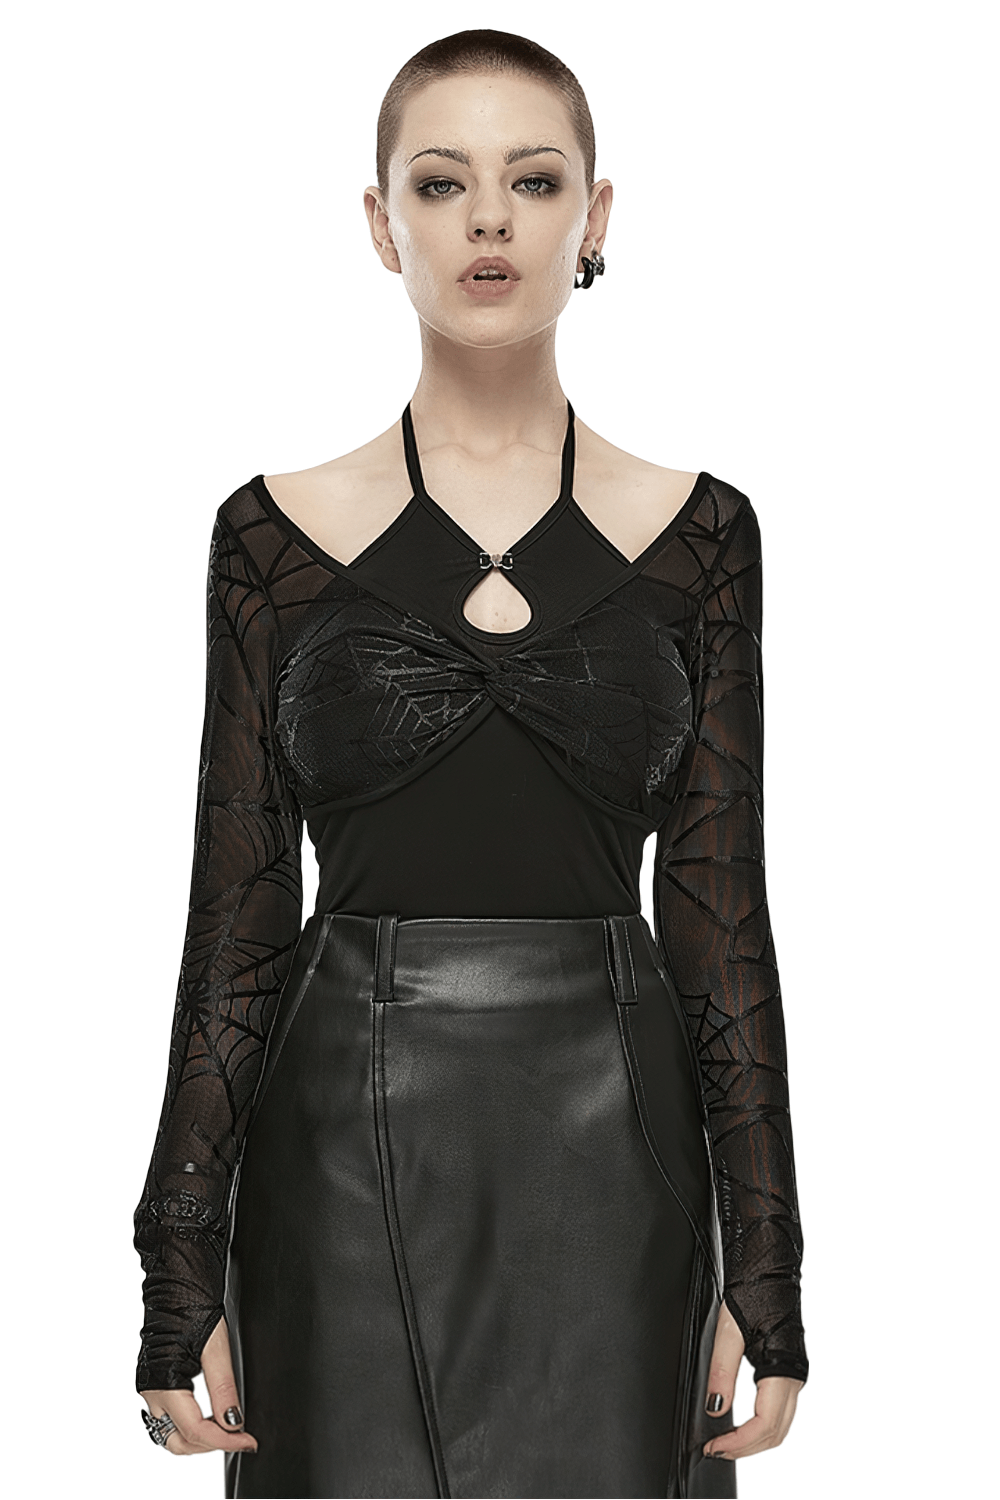 Black Halter Neck Two-Piece Top with Spiderweb Sleeves